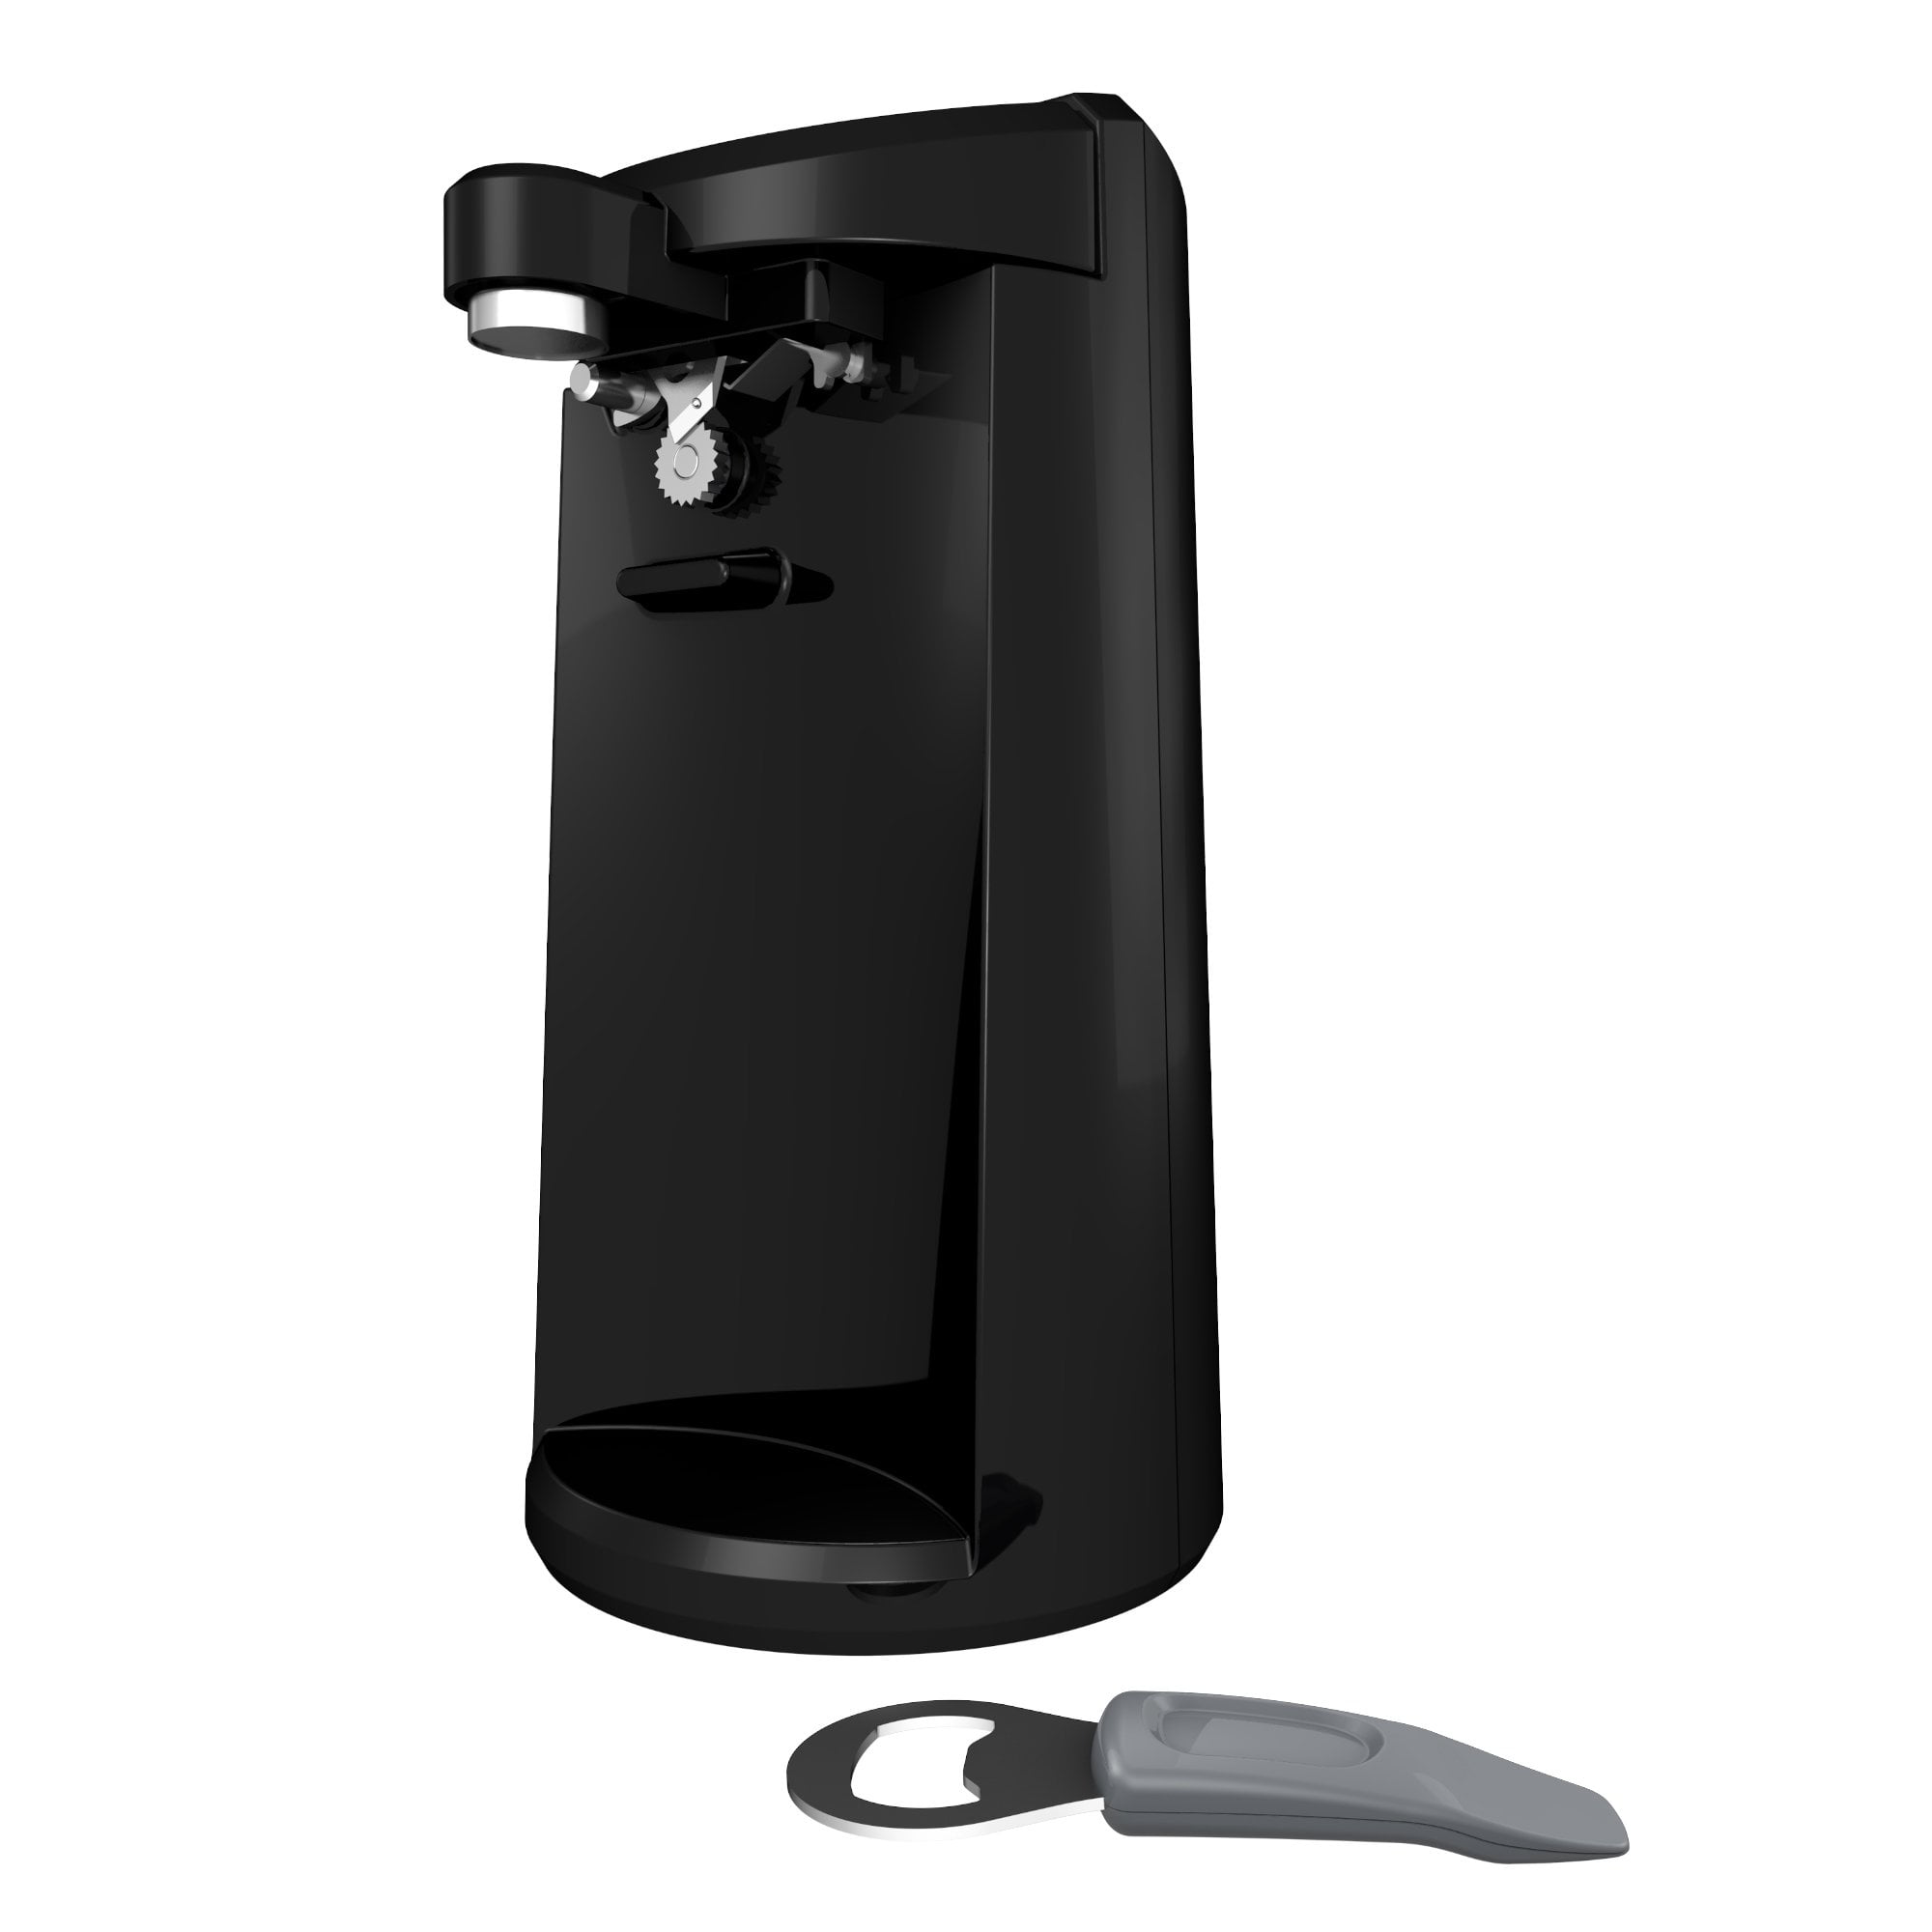 BulbHead 14636 Can Opener - Black for sale online